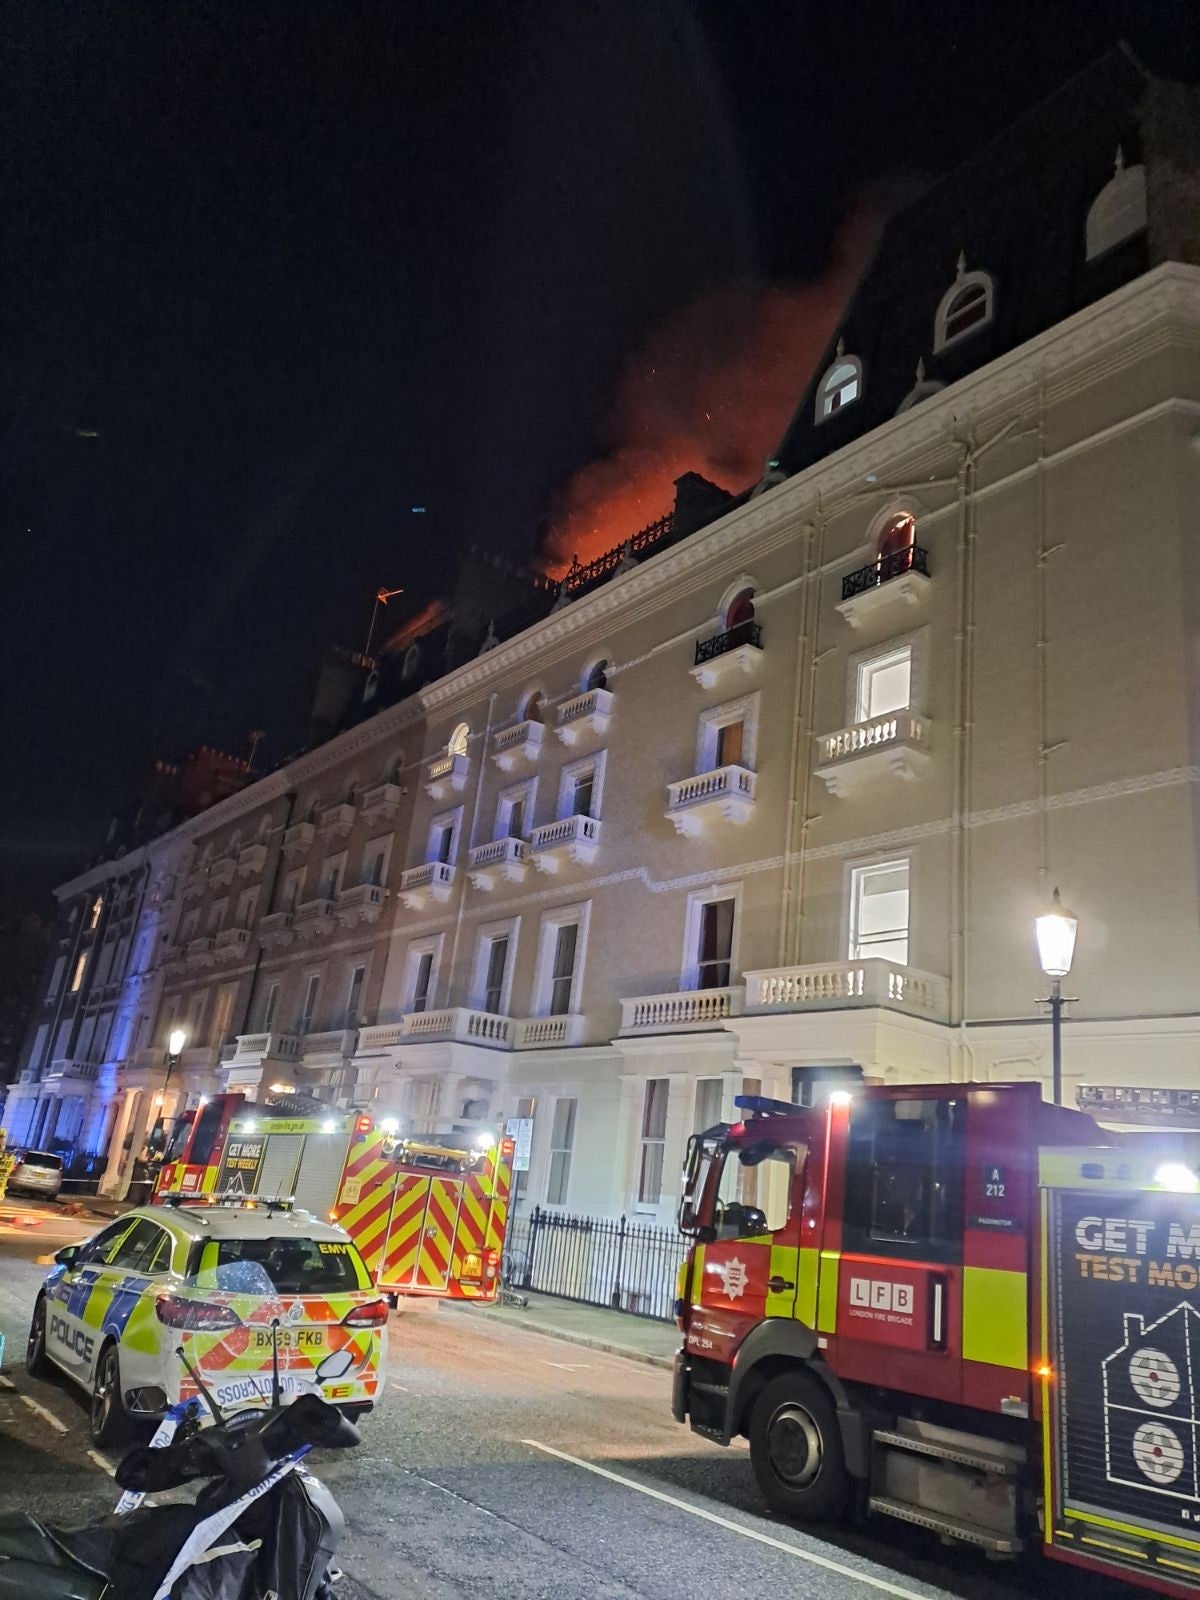 Eleven people were taken to hospital with more than 130 people evacuated from thebuilding